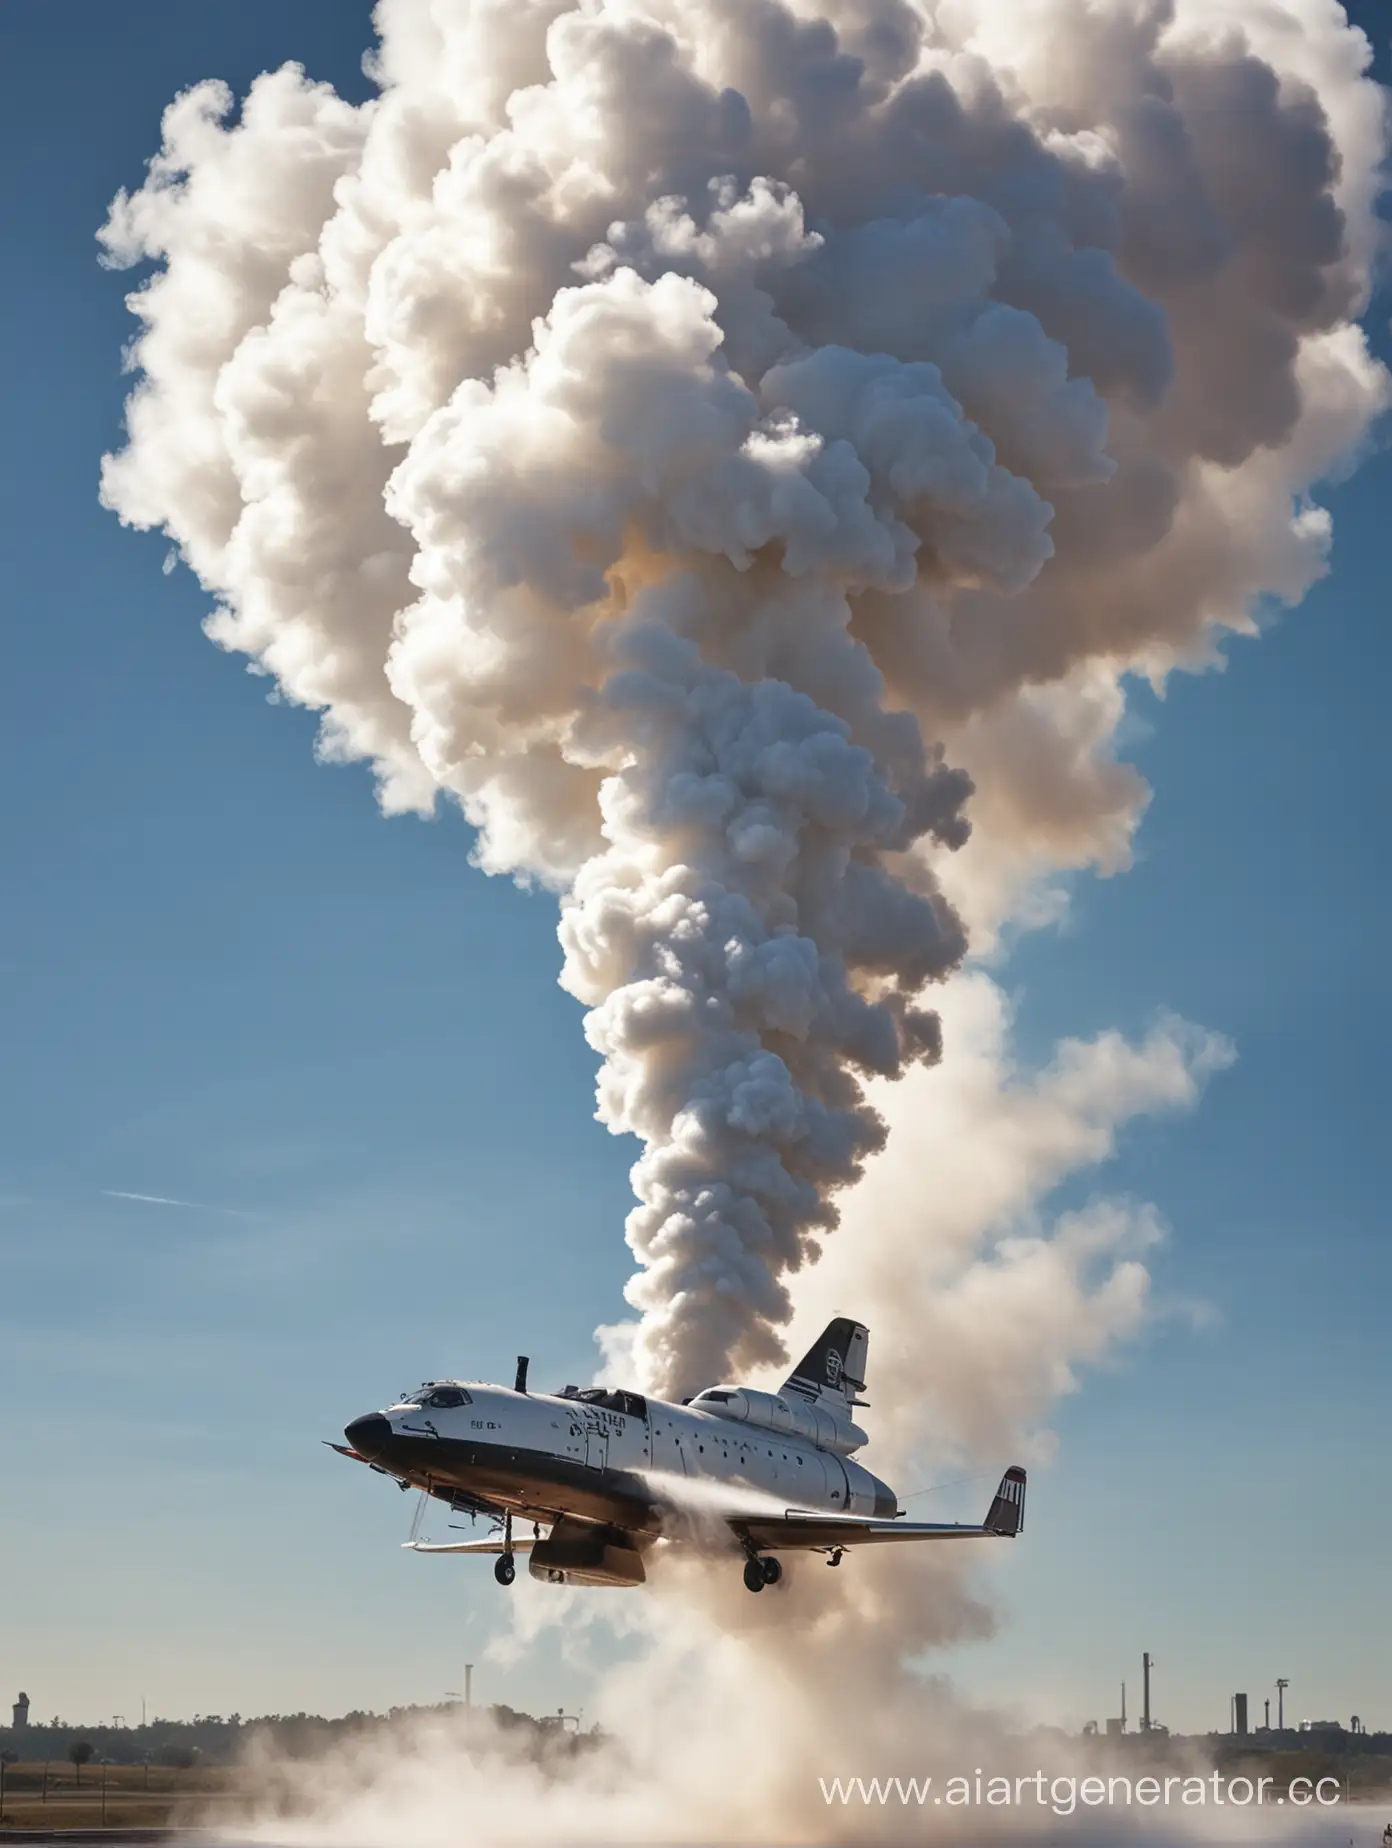 Energetic-Steam-Jet-Bursting-with-Motion-and-Power